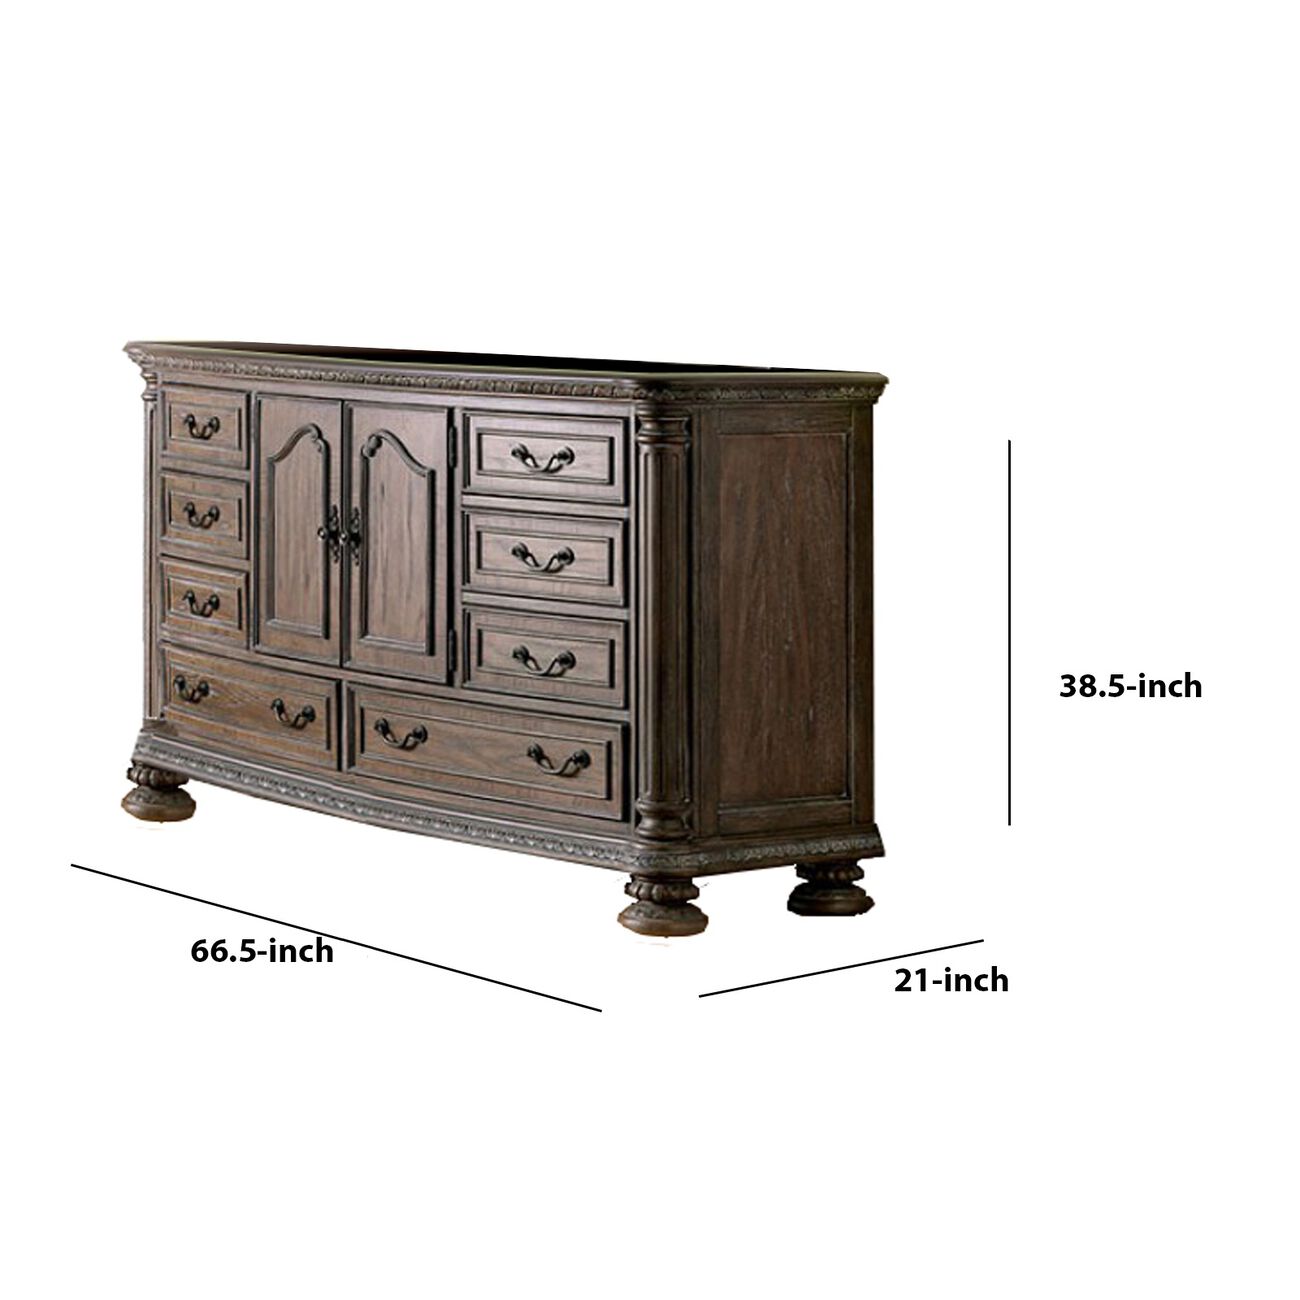 8 Drawers Wooden Dresser with Cabinet and Carving Details, Brown